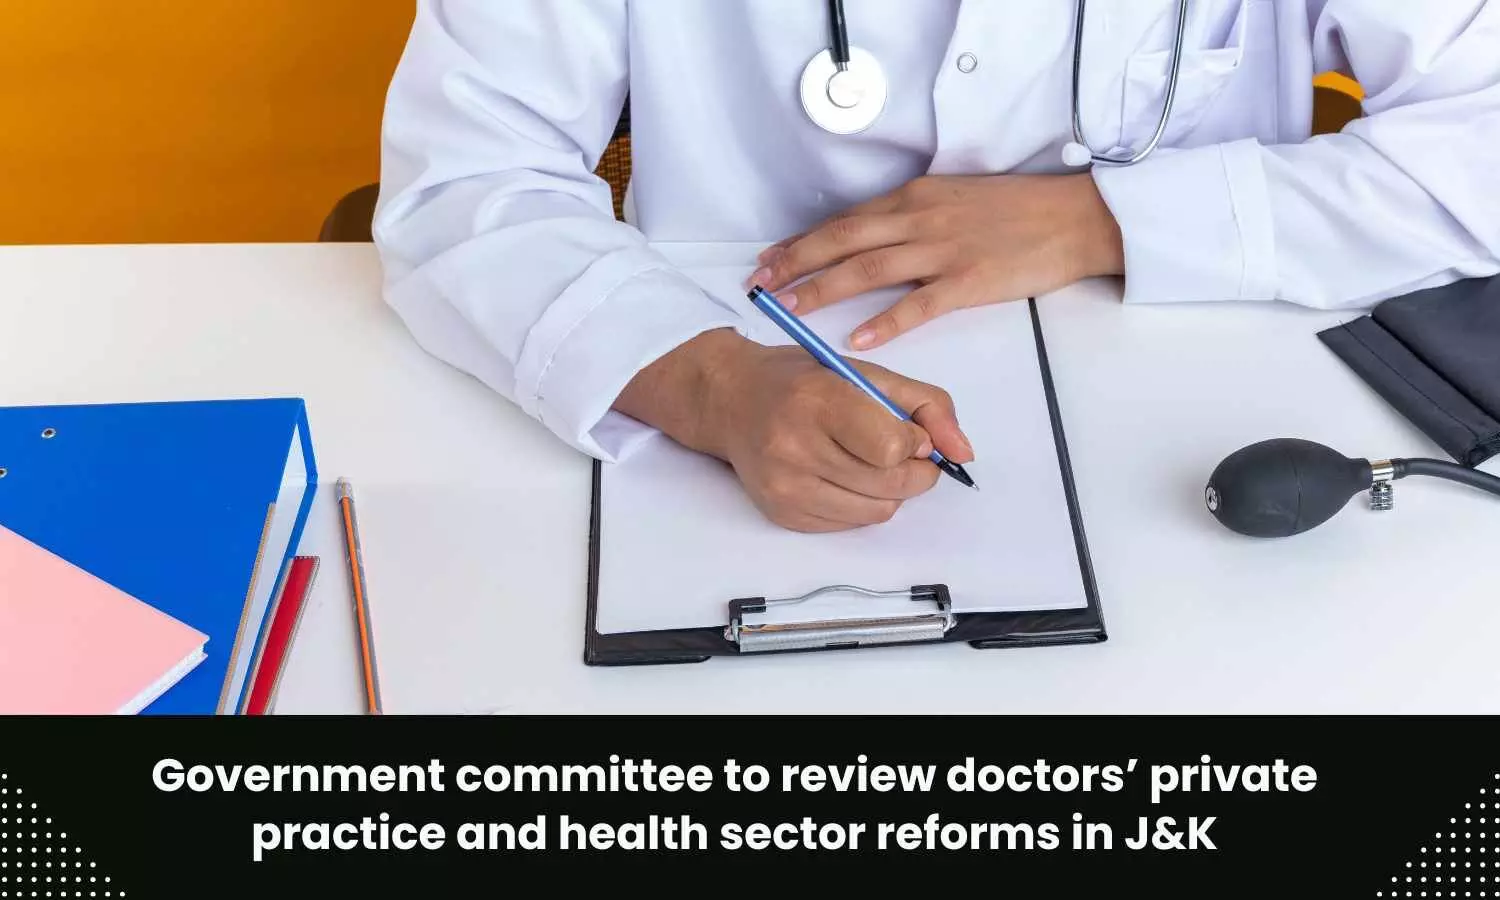 Doctors private practice, health sector reforms in J&K to be reviewed by Govt committee